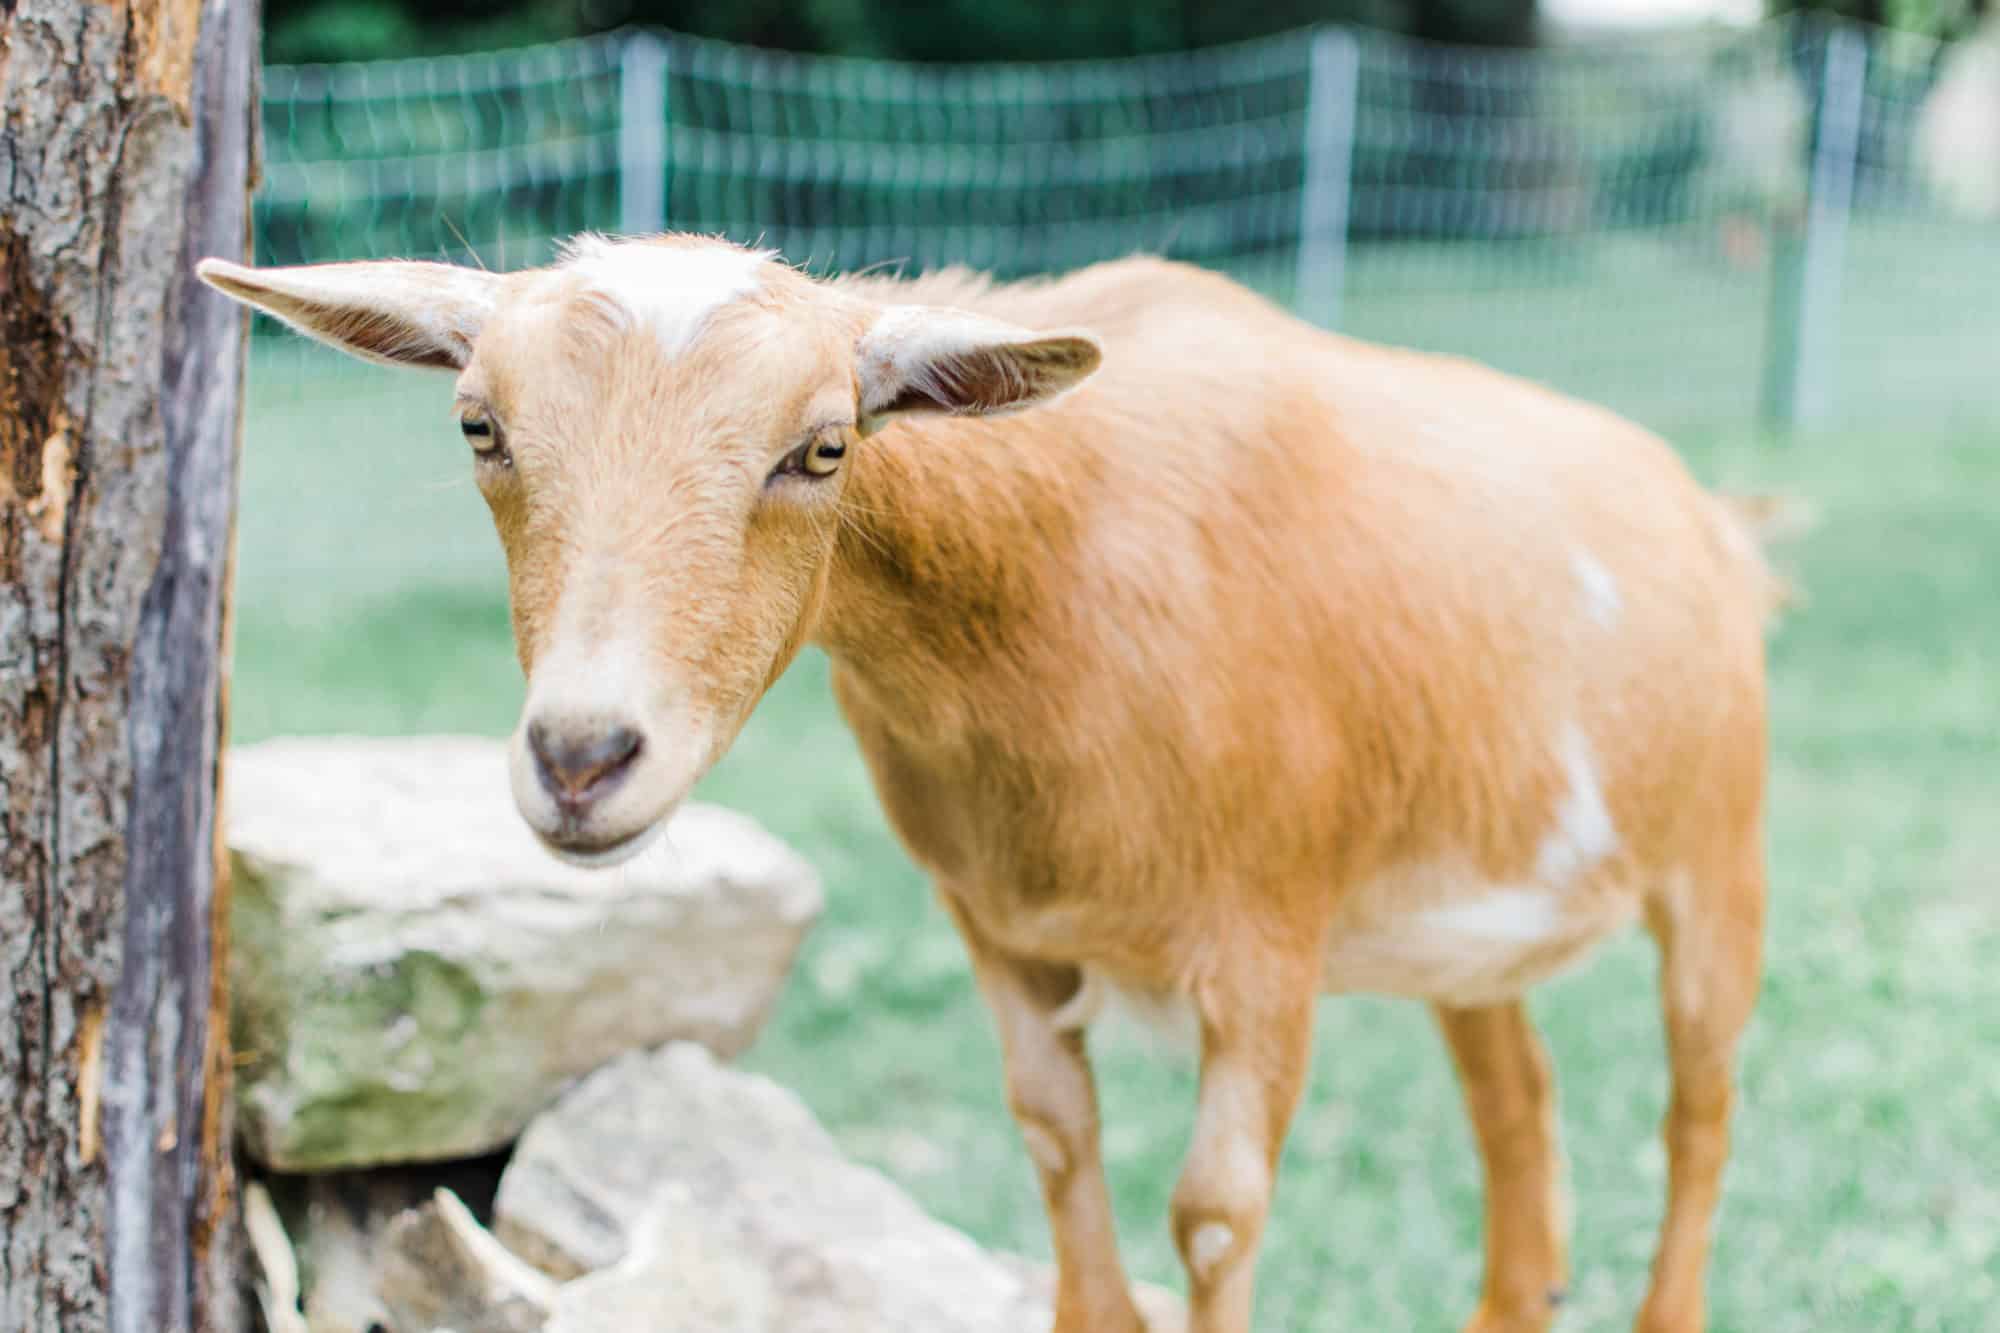 Frenchie Farm tips for buying your first goat